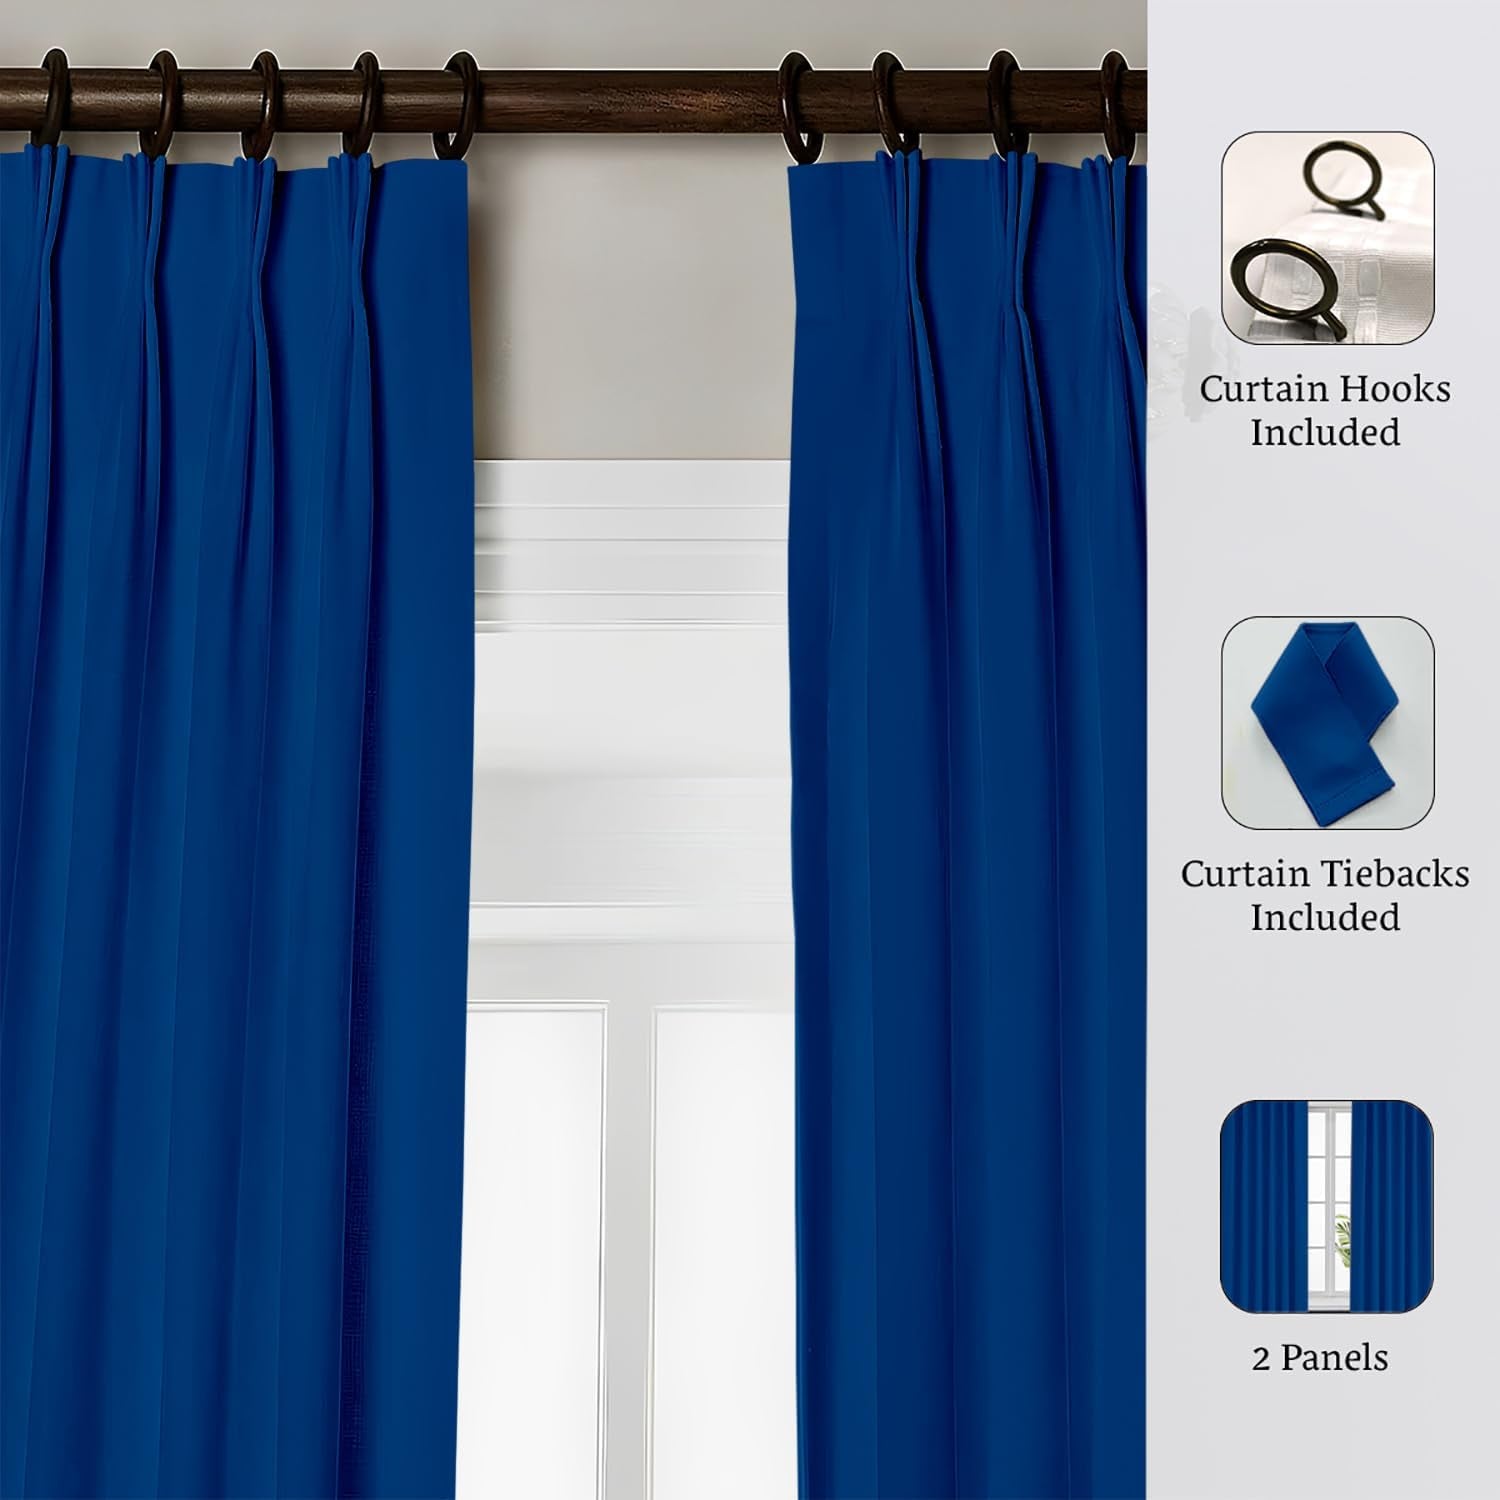 Magic Drapes Pinch Pleated Curtains Triple Pinch Pleat Drapes with Tiebacks & Hooks Blackout Thermal Room Darkening Window Curtains for Living Room, Bedroom, Hall W(26"+26") L45 (2 Panels, Royal Blue)  Magic Drapes   